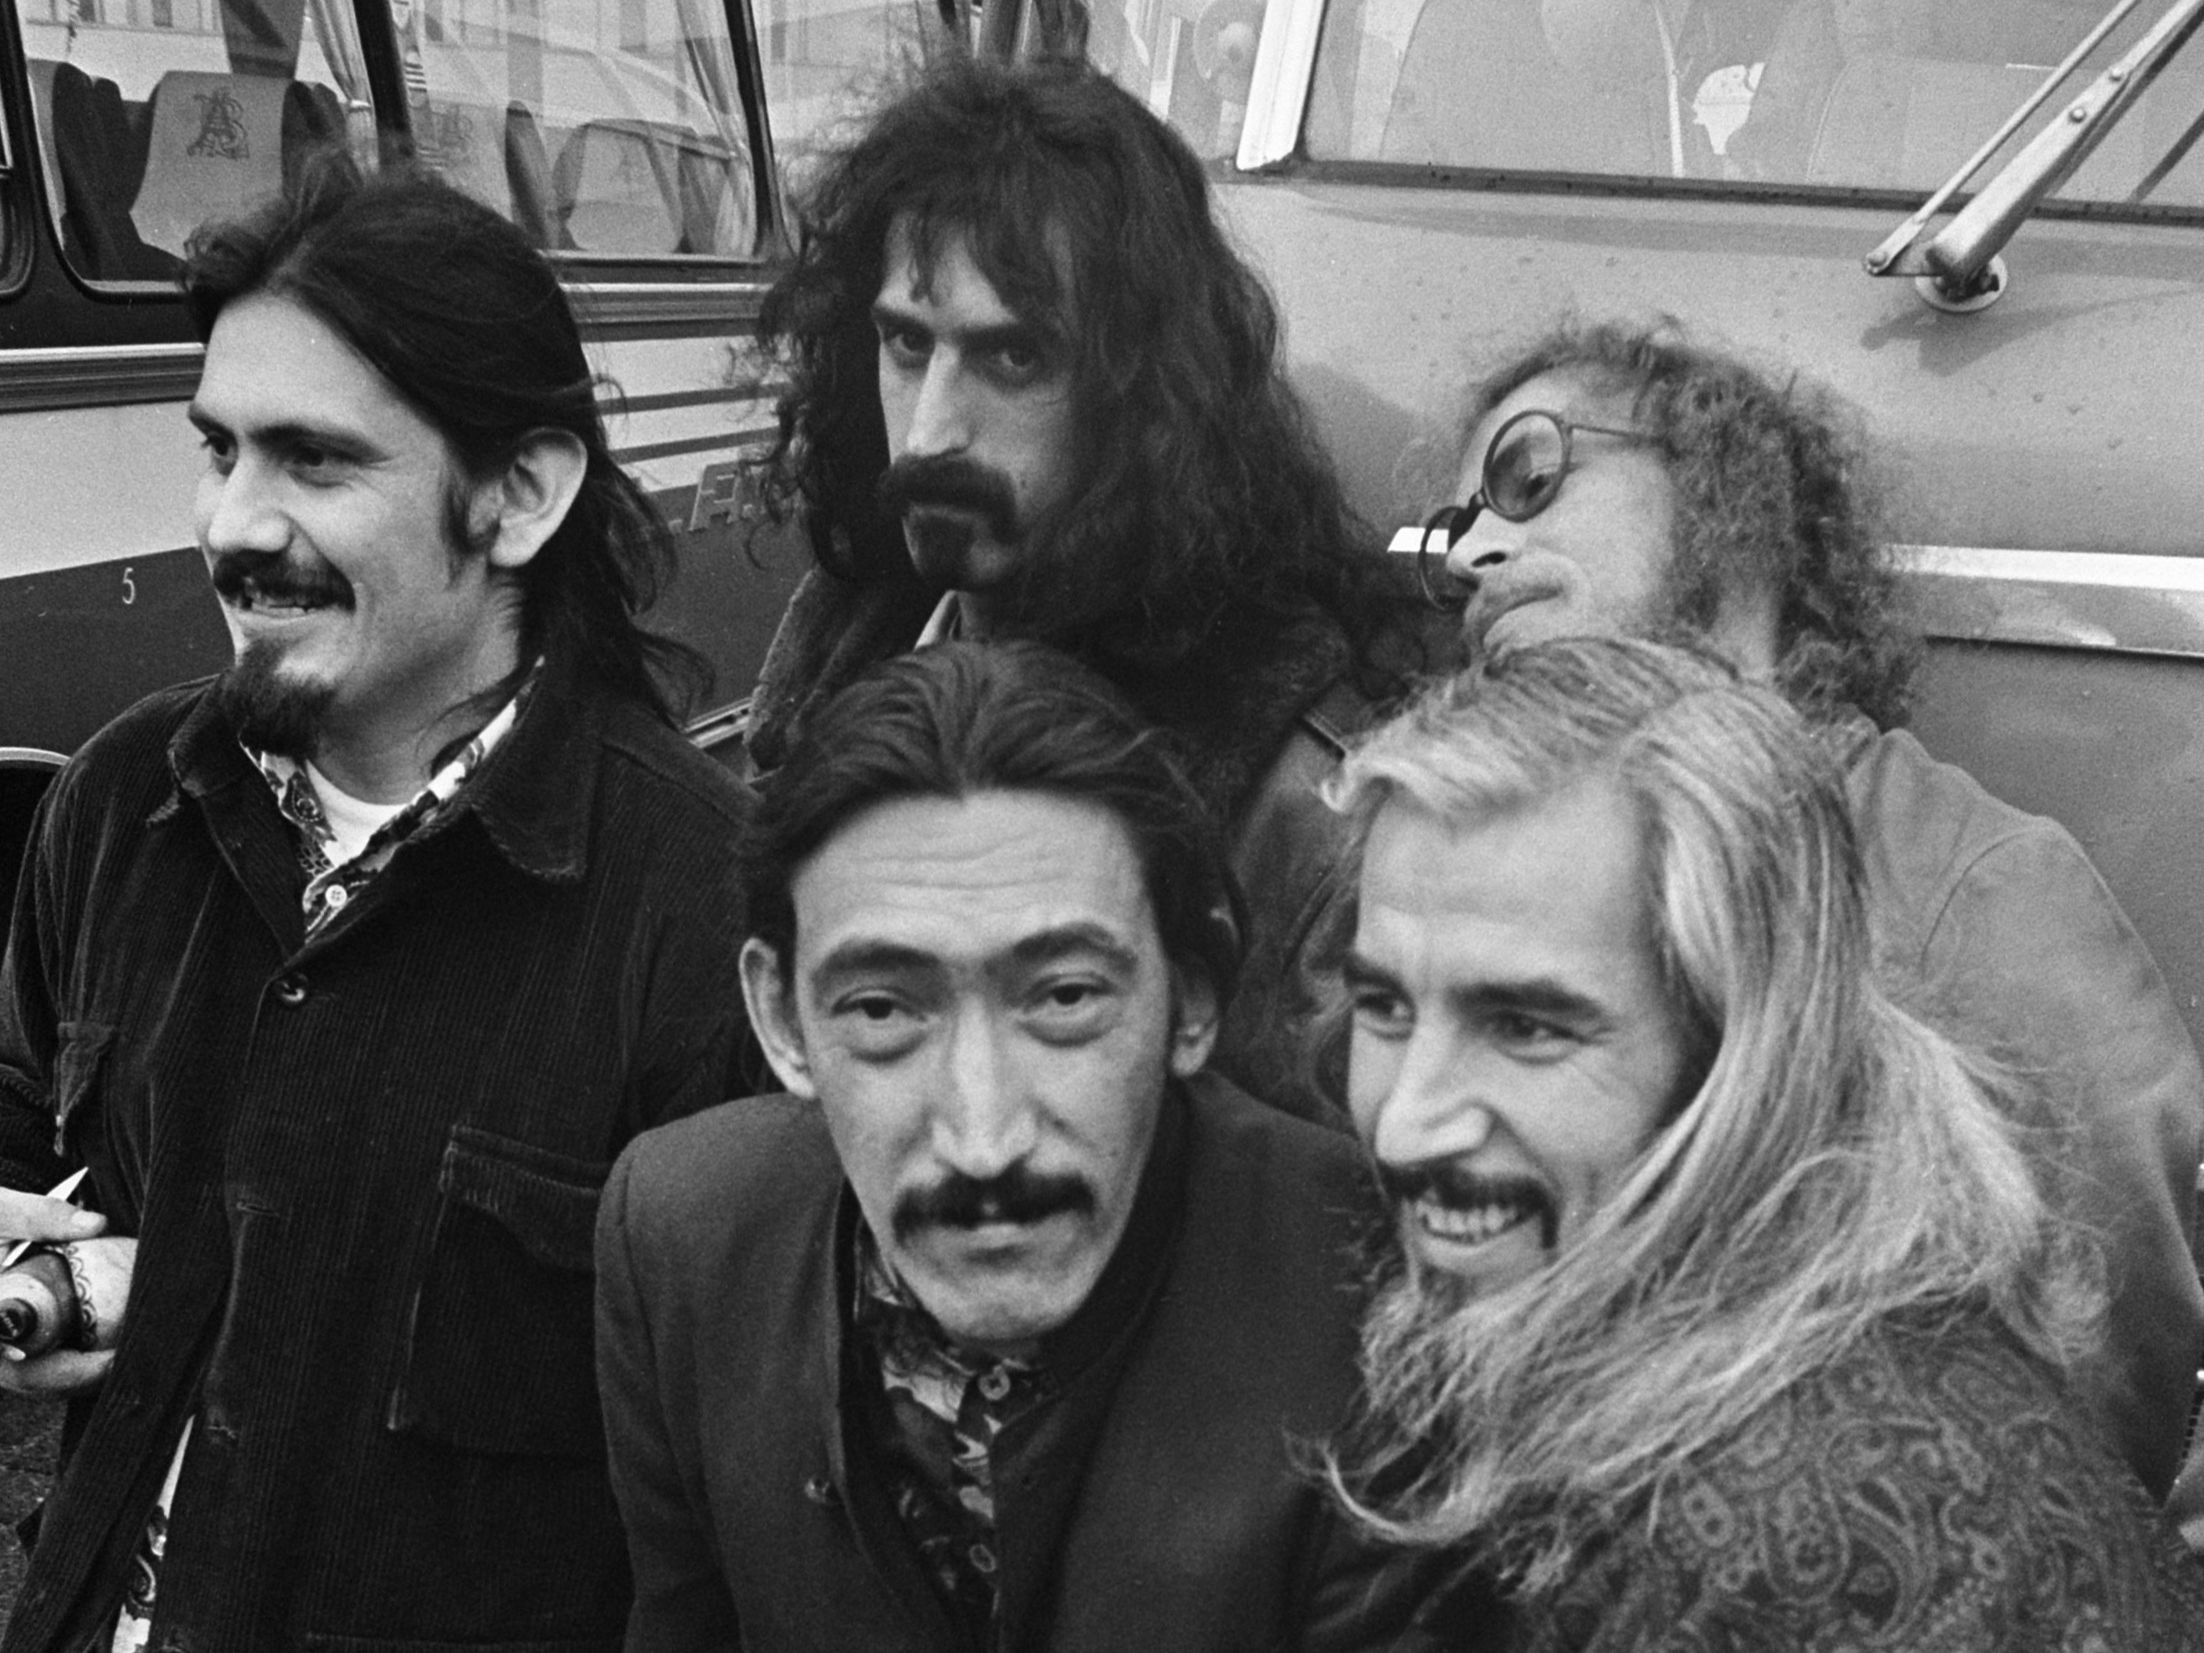 Frank Zappa and The Mothers of Invention